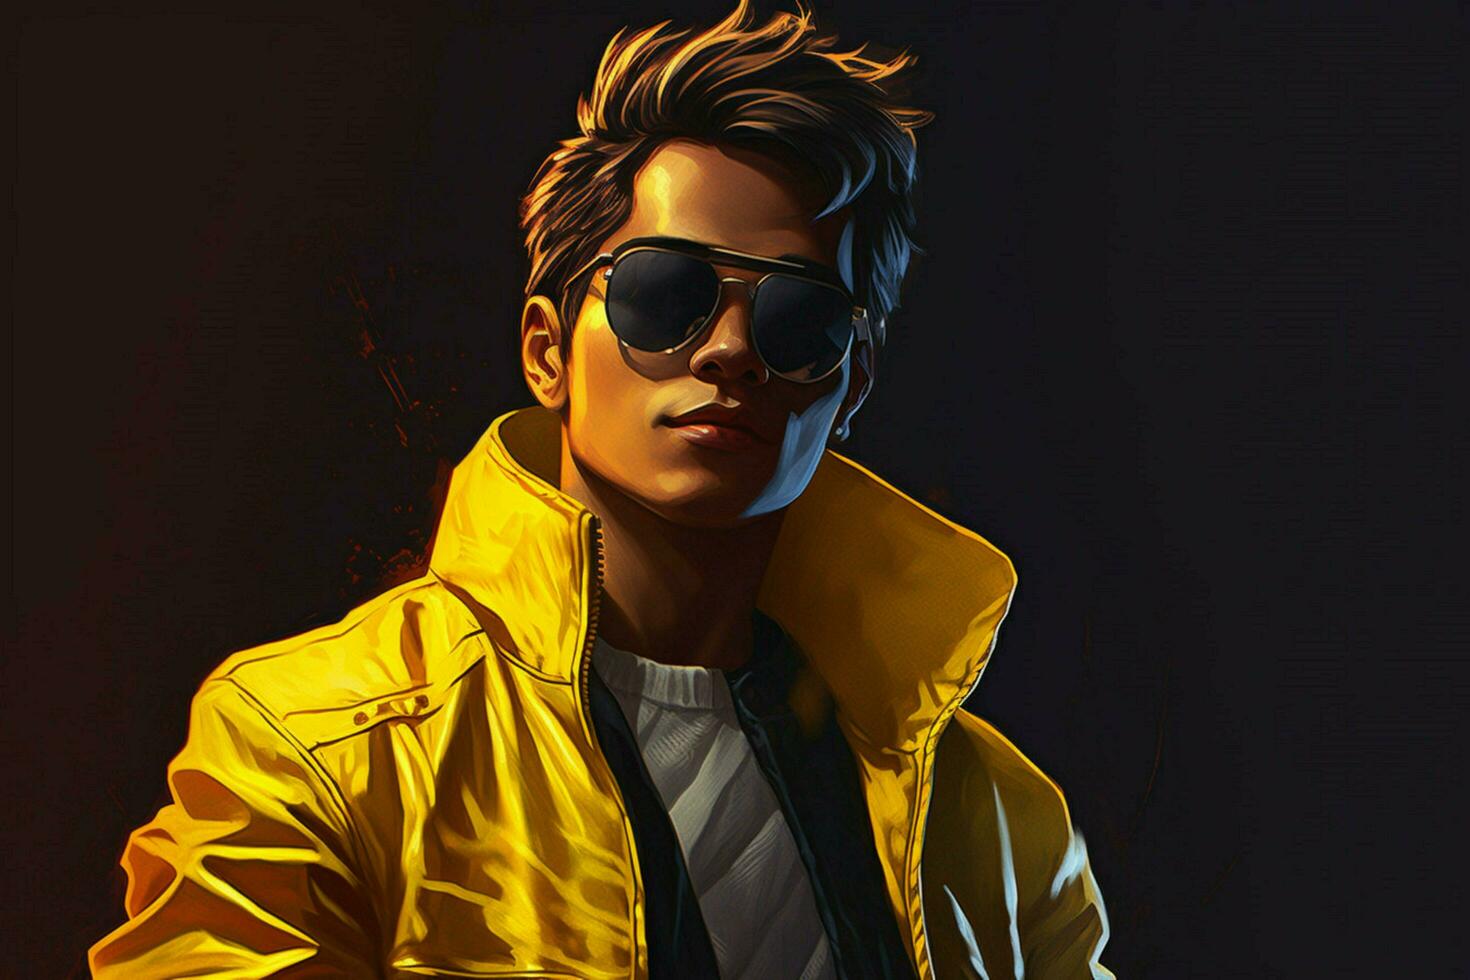 a character wearing a yellow jacket and sunglasse photo